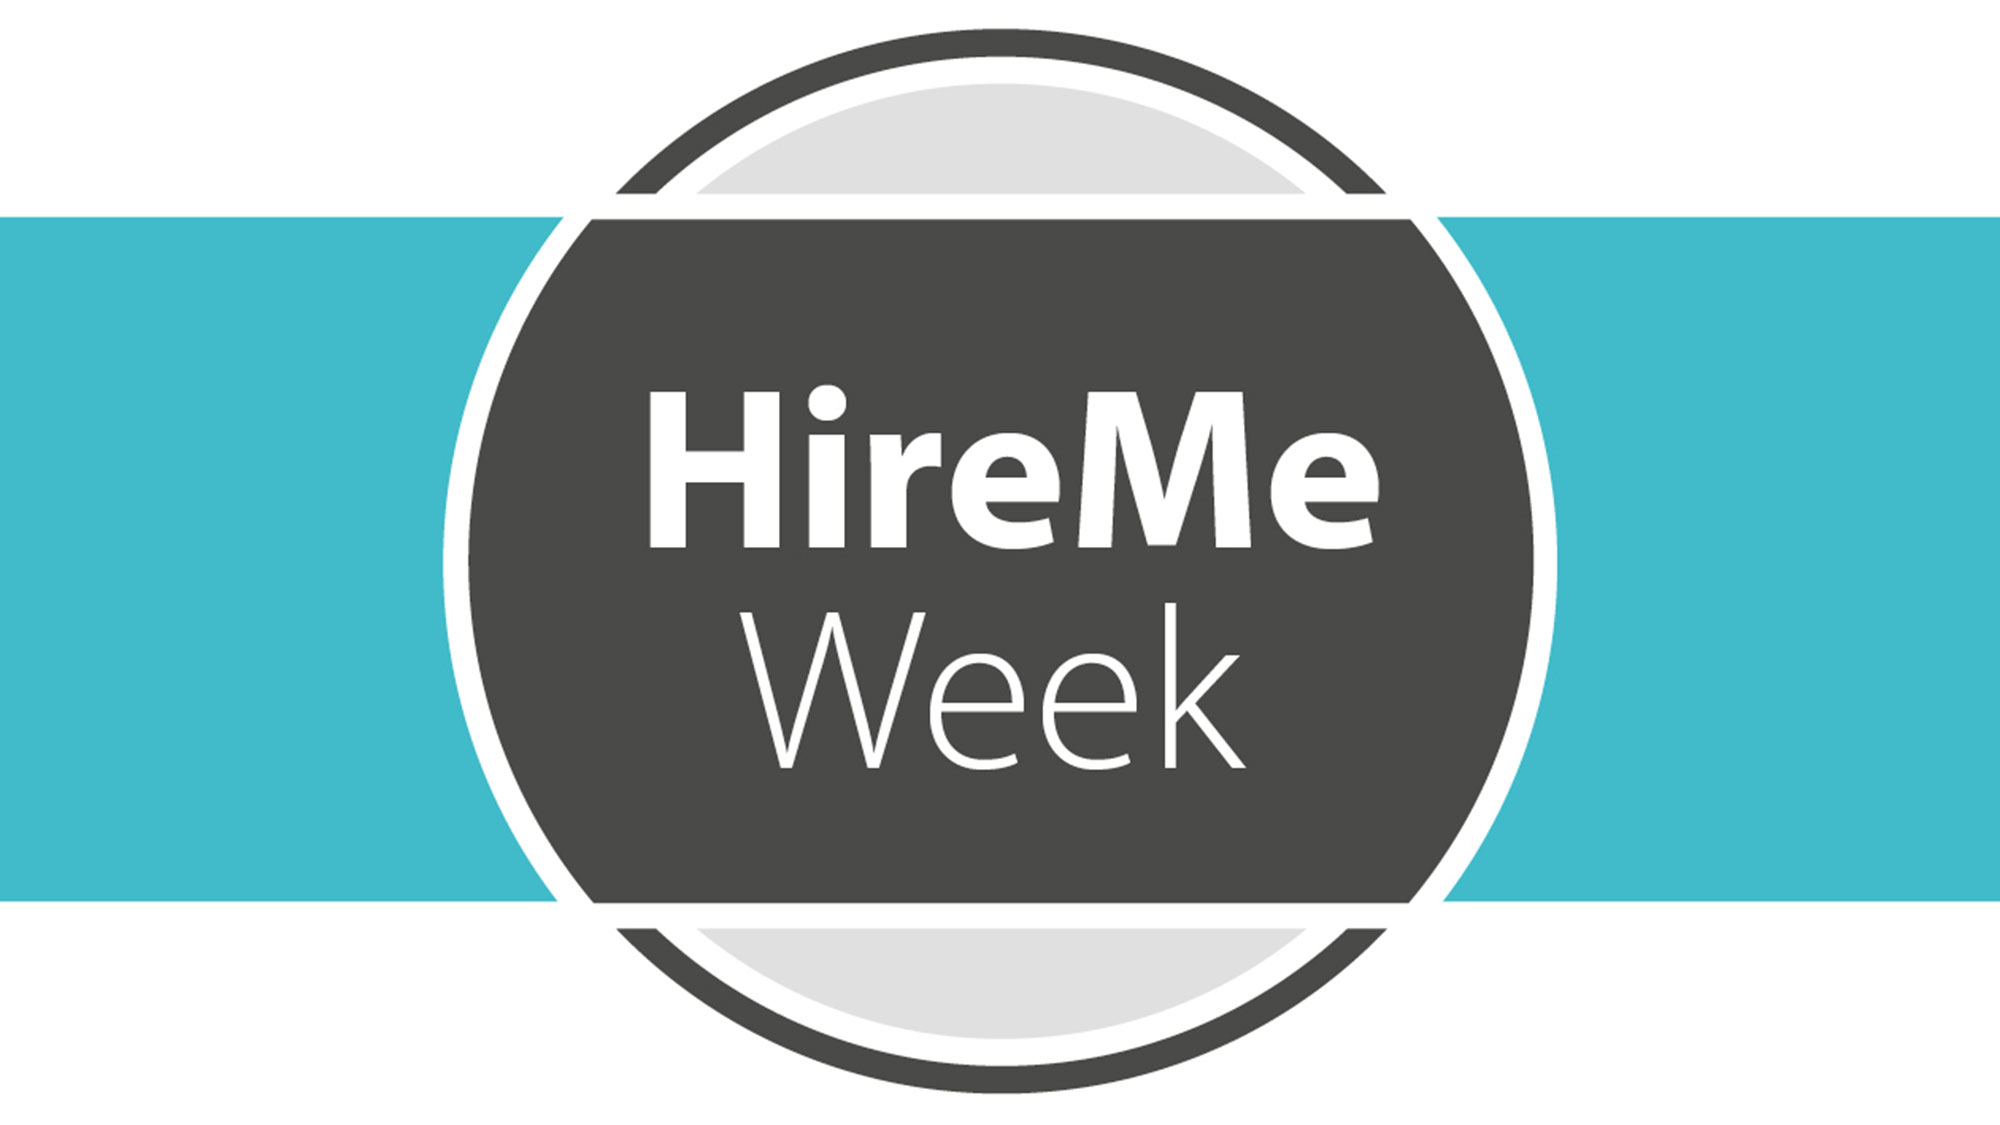 HireMe Week: Access your Skills and Gain Ones Employers Want